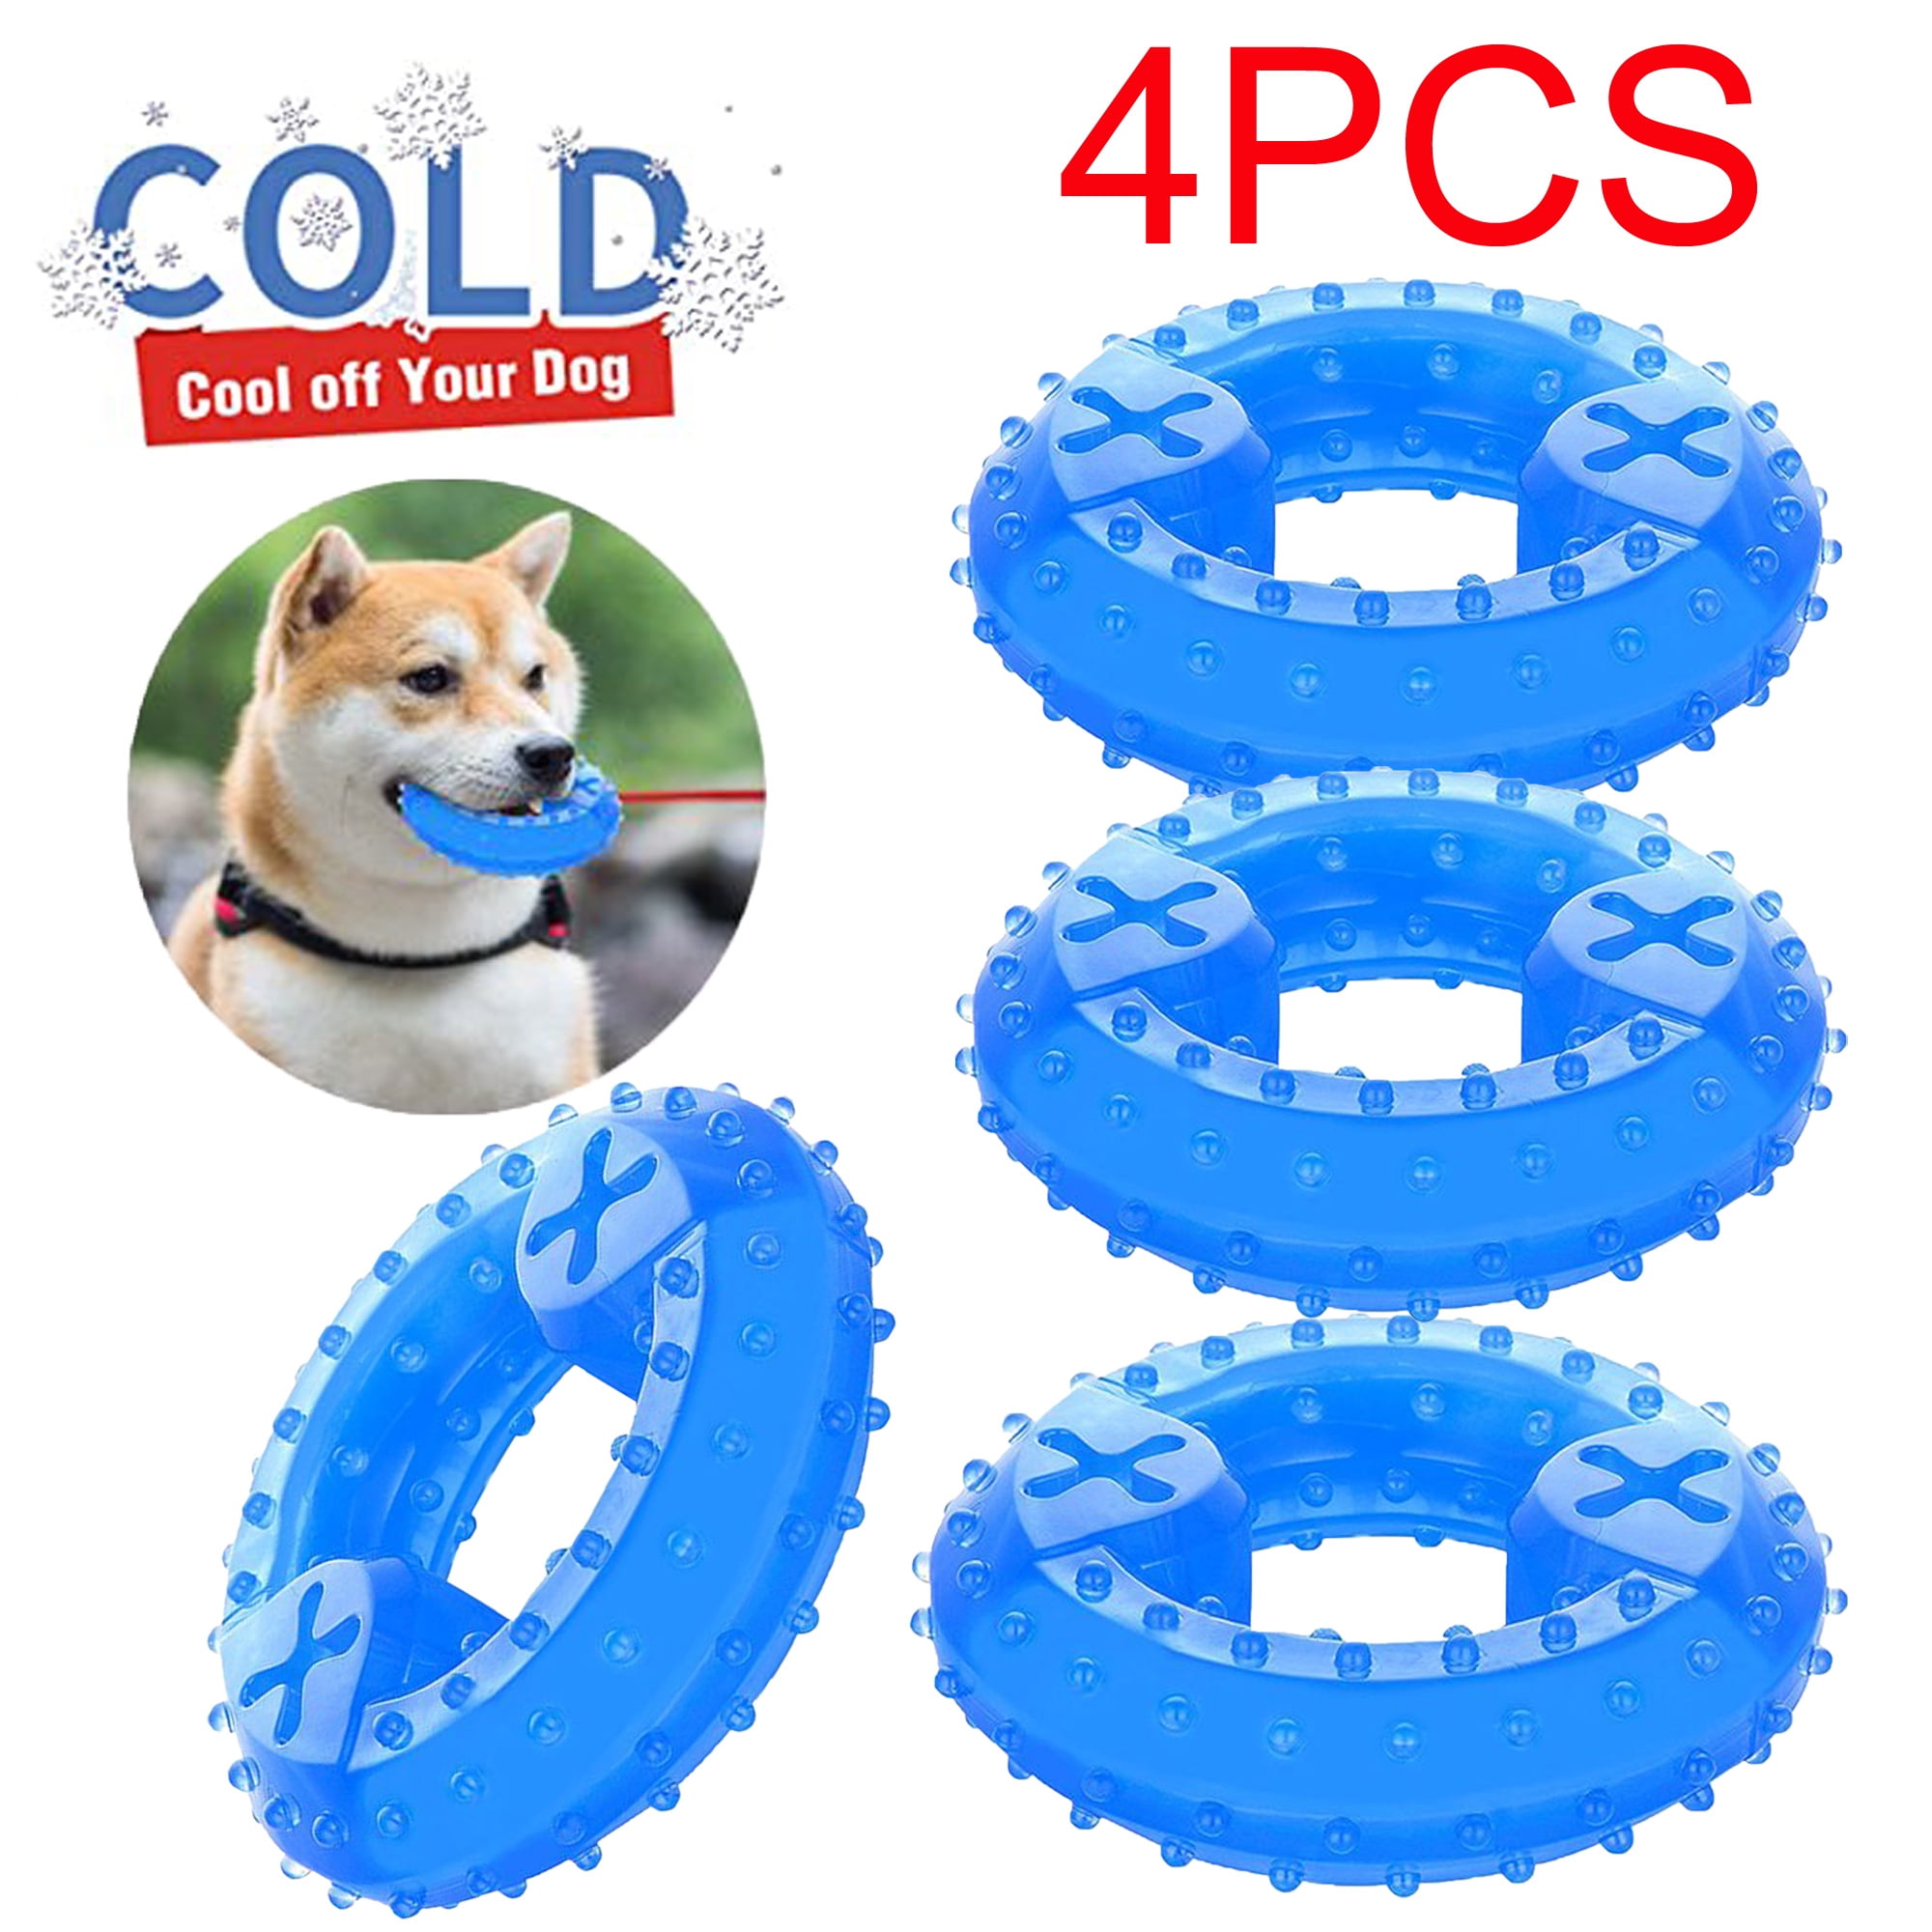 Cdipesp Dog Cooling Toy Puppy Teething Ring Freeze Dogs Chew Toy for Summer  Tough Durable Pet Toys